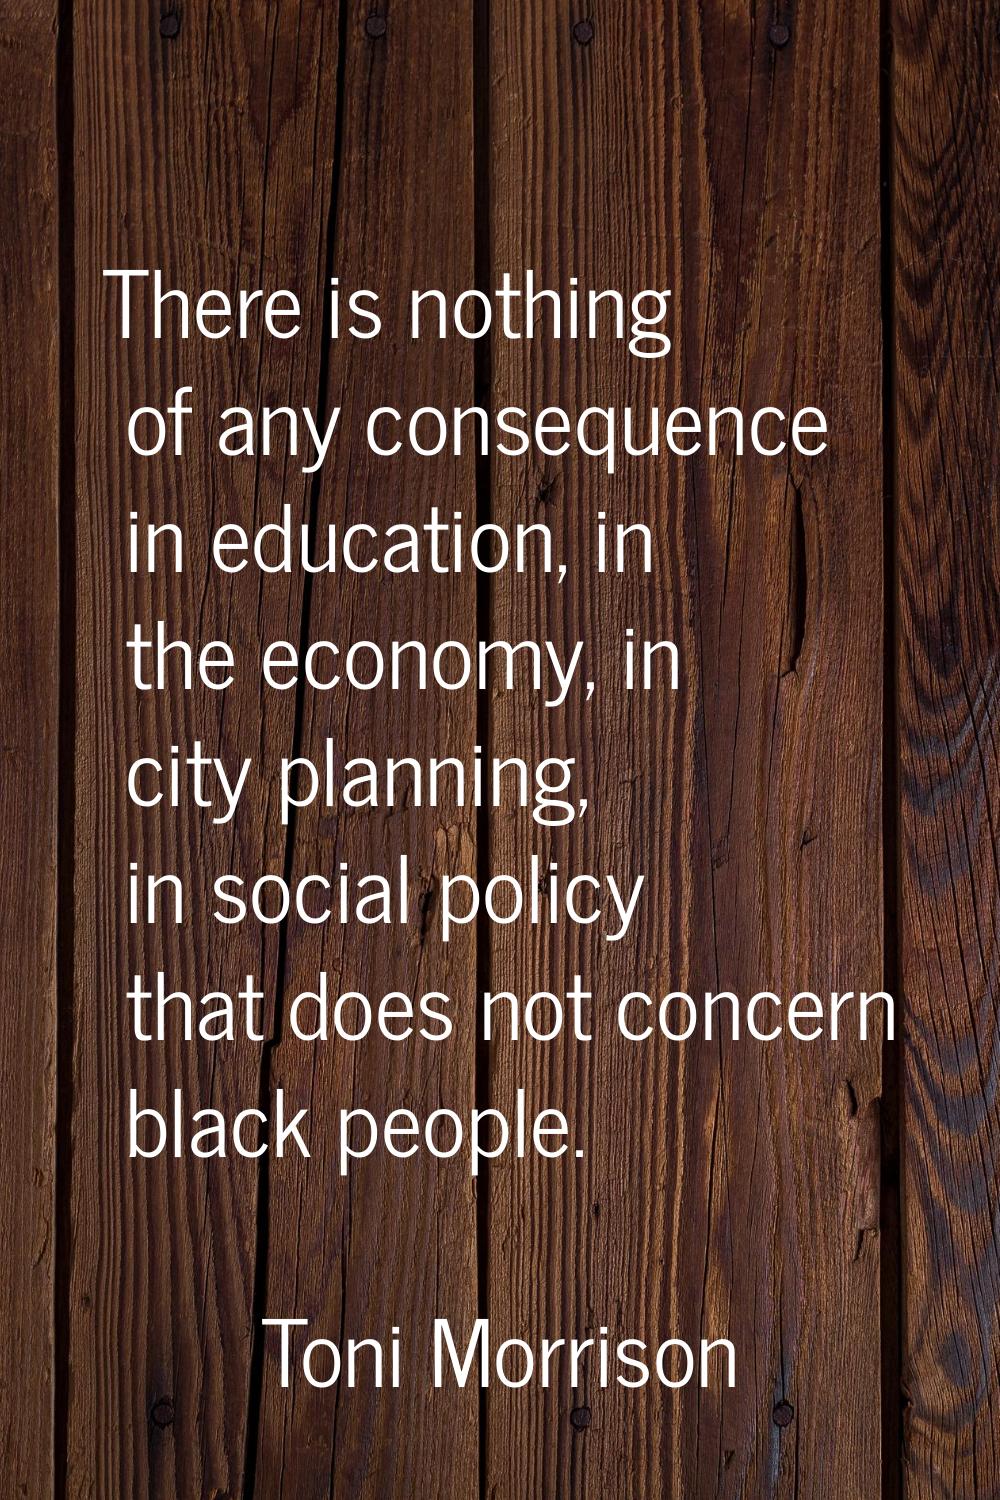 There is nothing of any consequence in education, in the economy, in city planning, in social polic